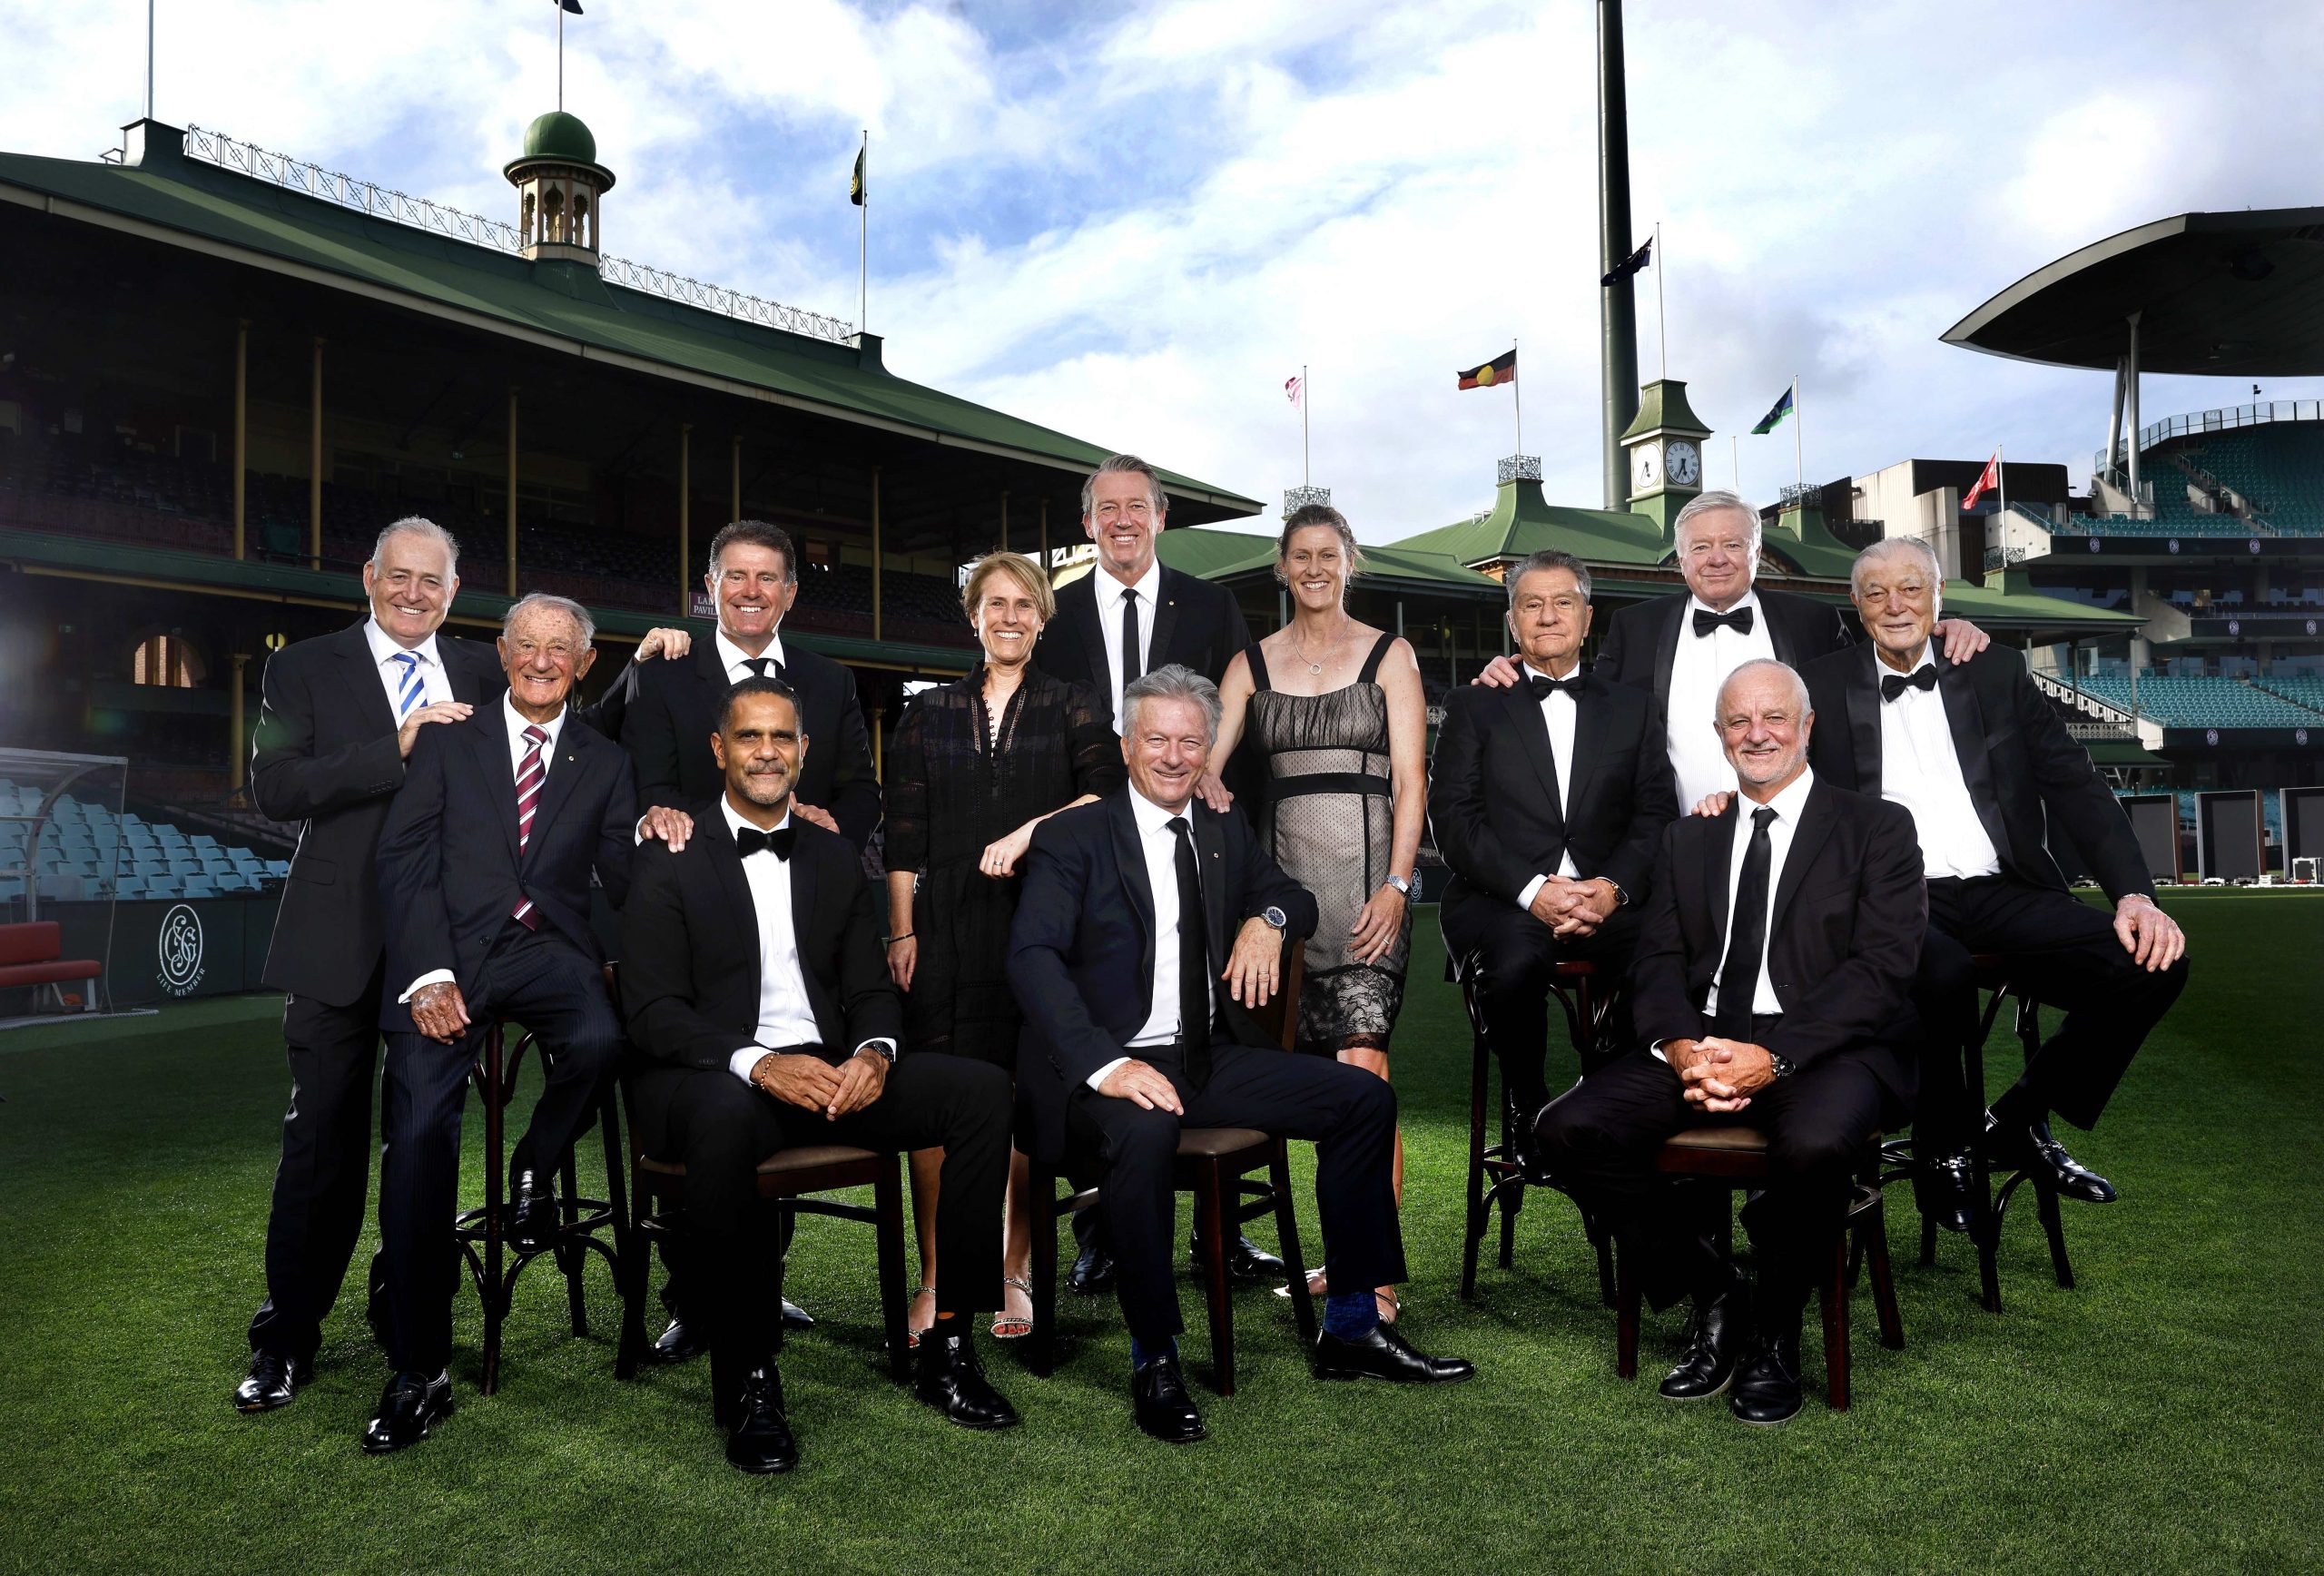 New inductees David Campese, Ken Arthurson, Mark Taylor, Michael O’Loughlin, Belinda Clark, Glenn McGrath, Steve Waugh, Cheryl Salisbury, Nick Politis, Richard Colless, Graham Arnold and Basil Sellers at the SCG Life Member gala dinner on December 6, 2023. Photo by Phil Hillyard

(Image Supplied for Editorial One Time Use only - **NO ON SALES** - ©Phil Hillyard )